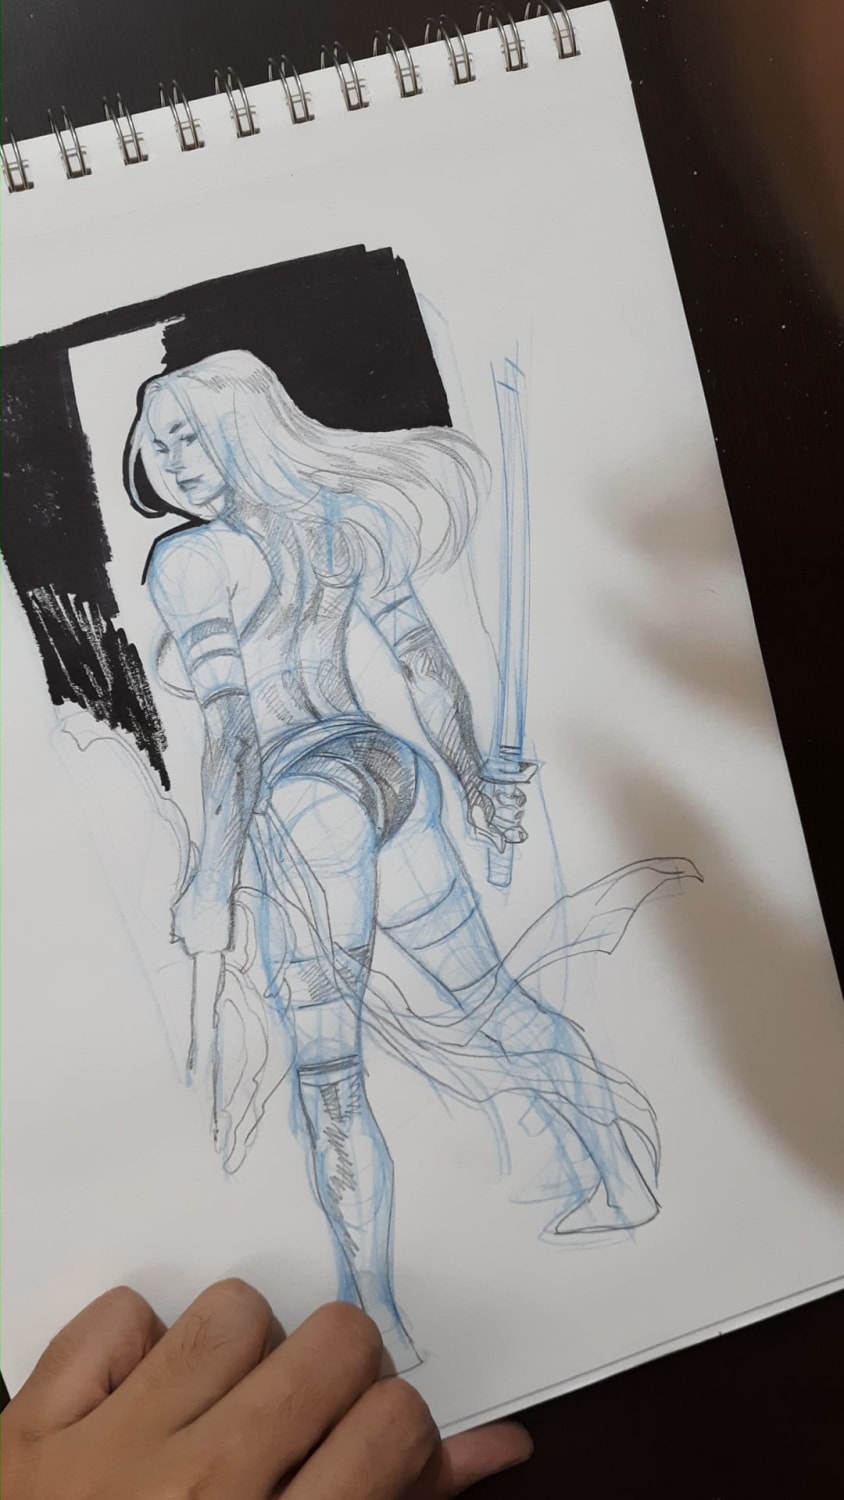 Drawing Psylocke for my daily warm-up sketch.